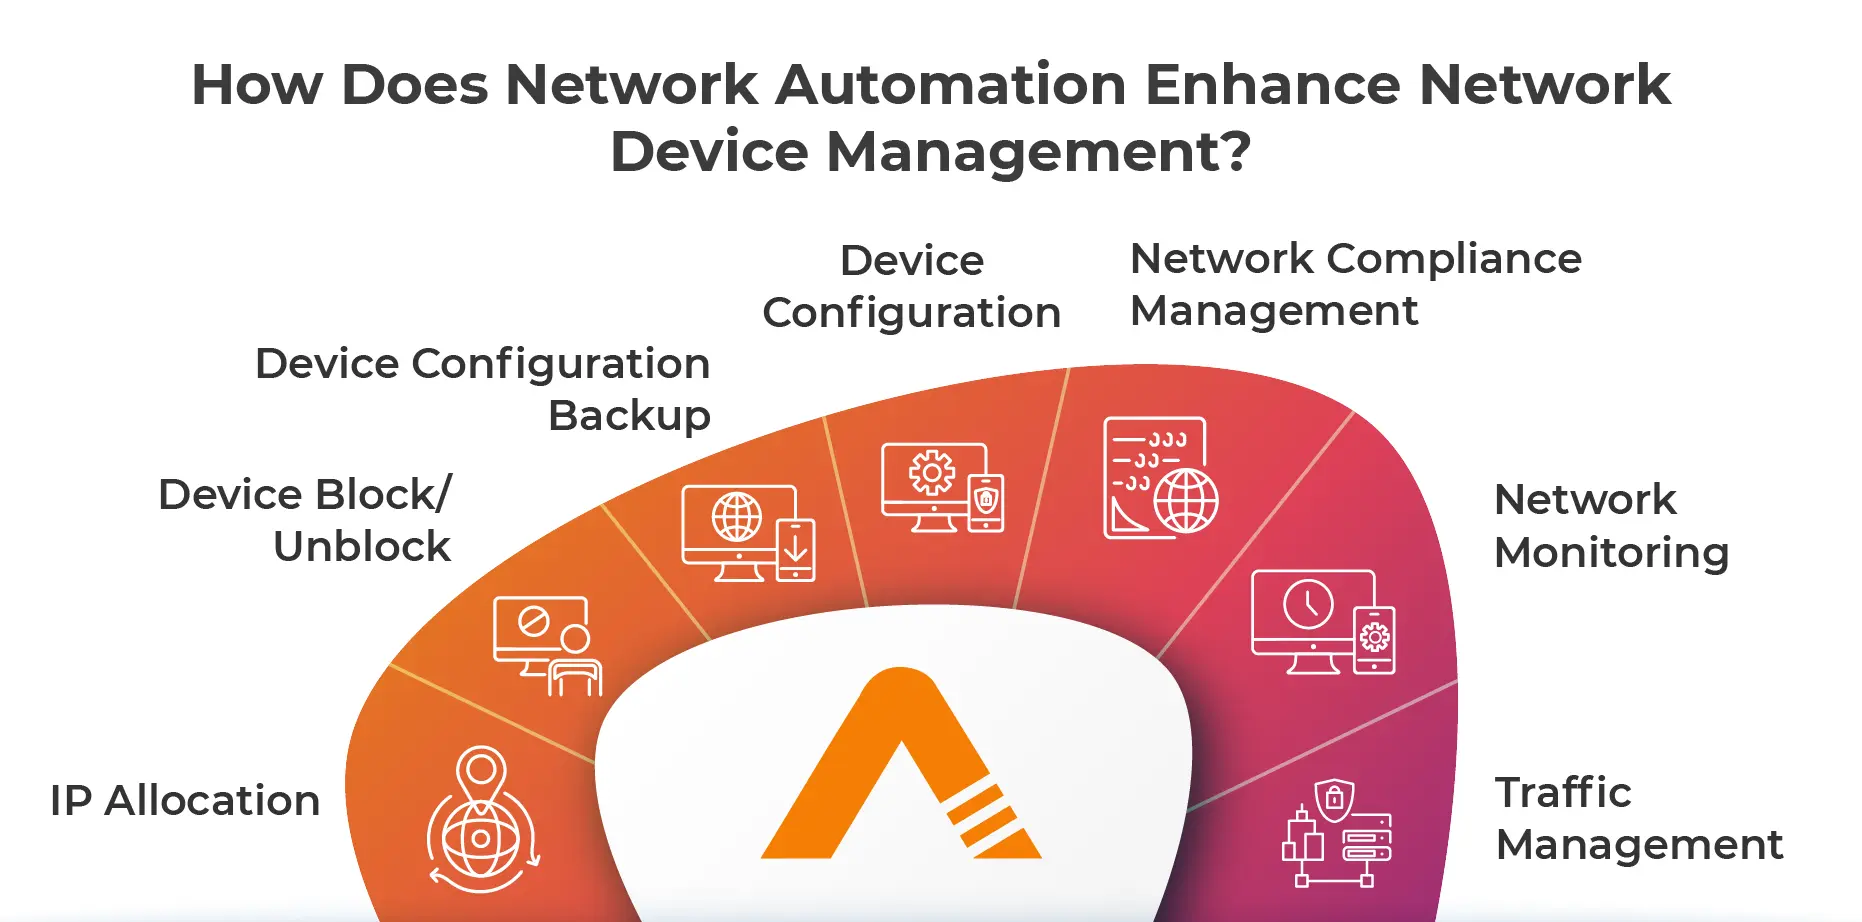 How Does Network Automation Enhance Network Device Management?